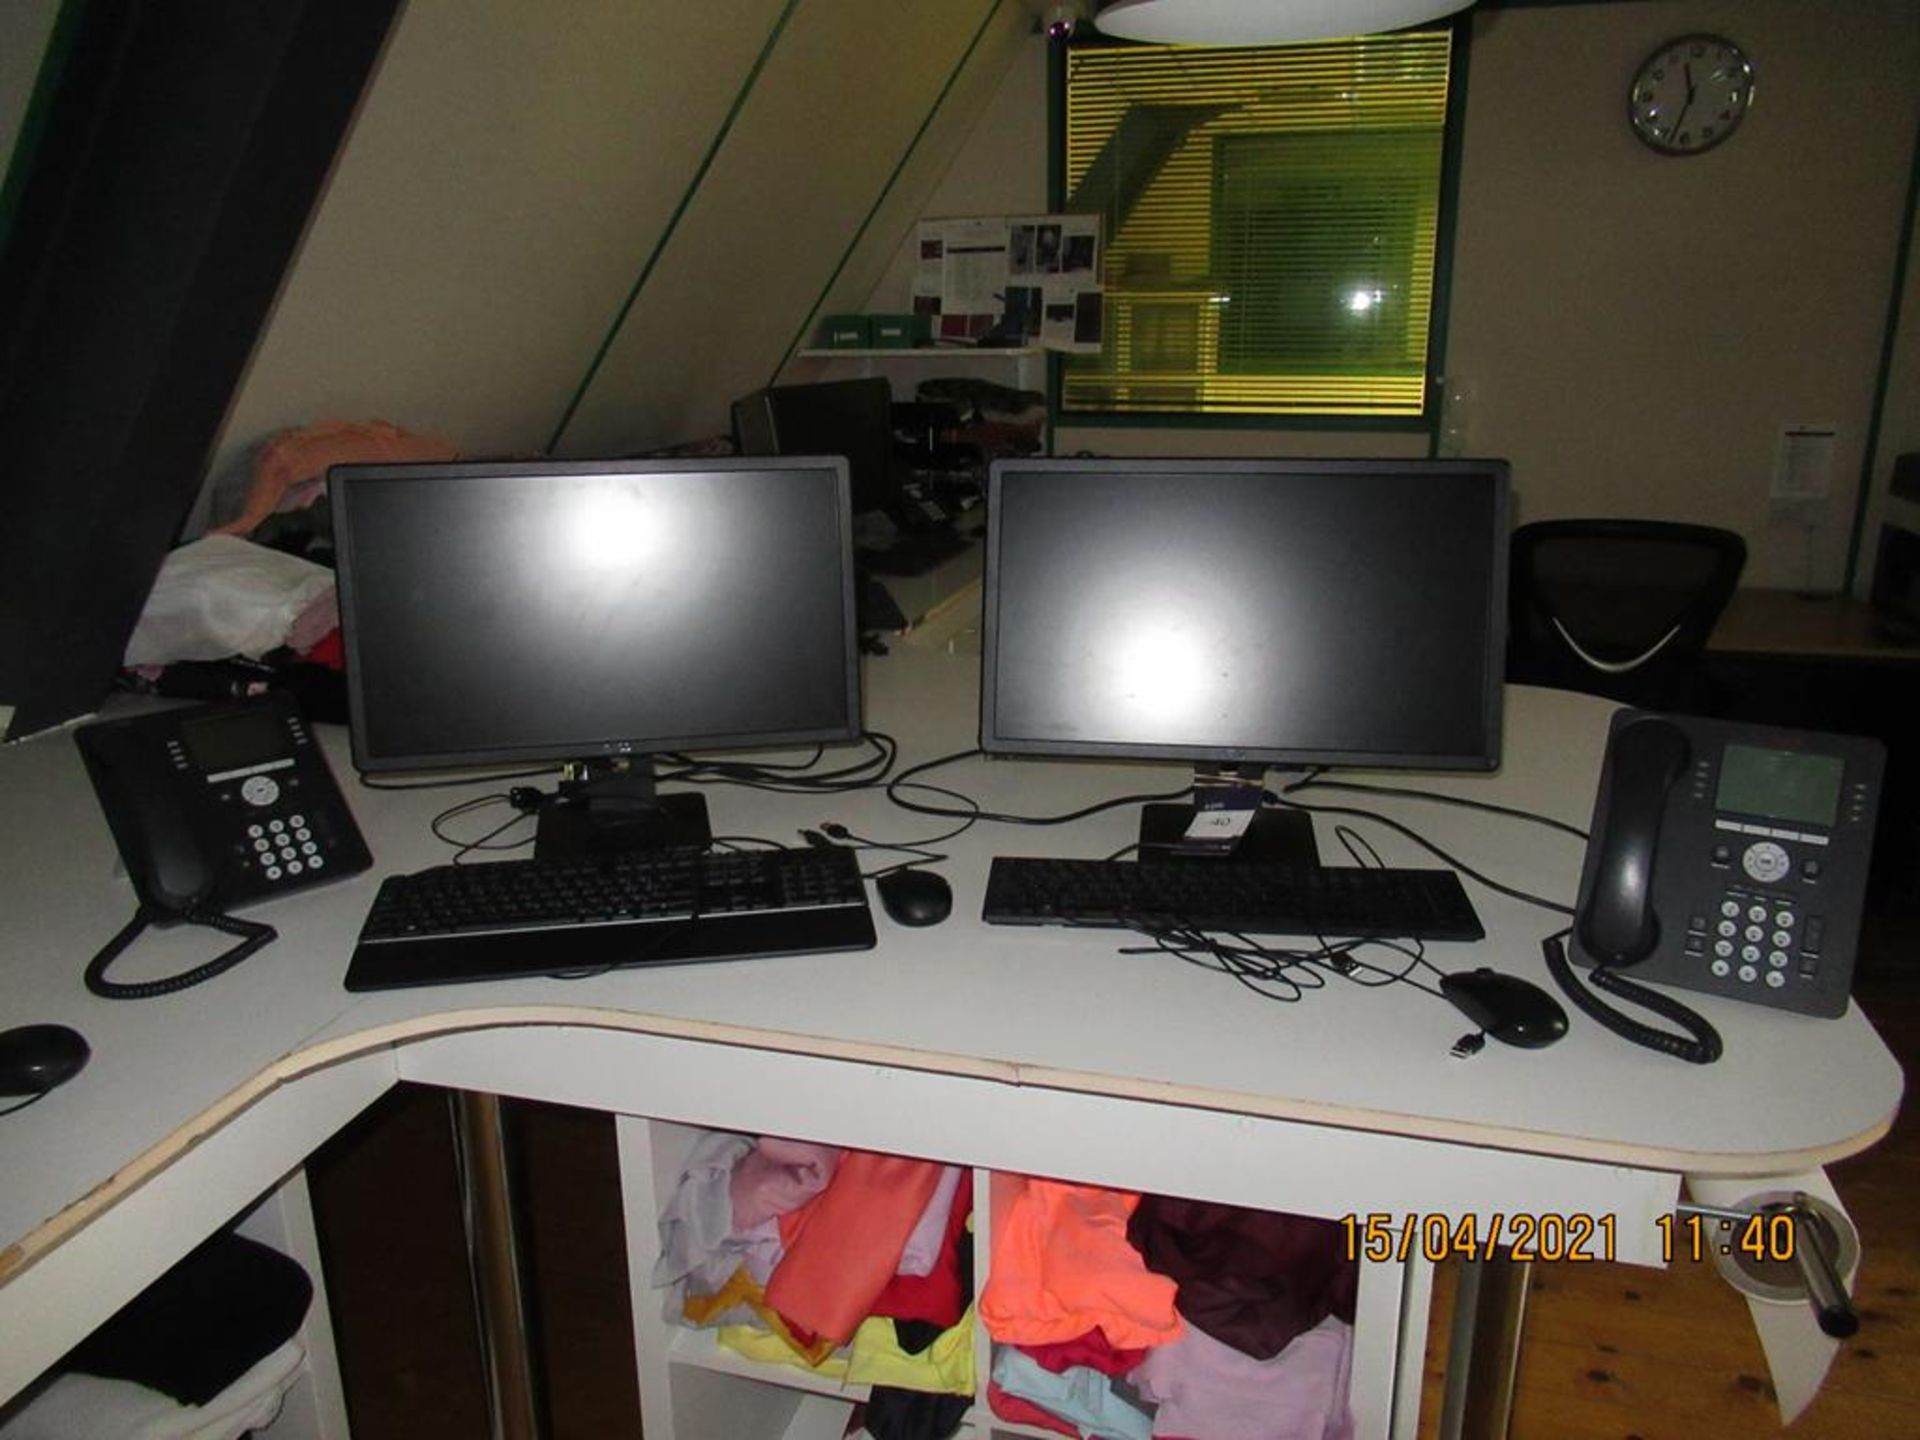 2x Dell Flat Screen Monitors, 2x Keyboards, Mouse